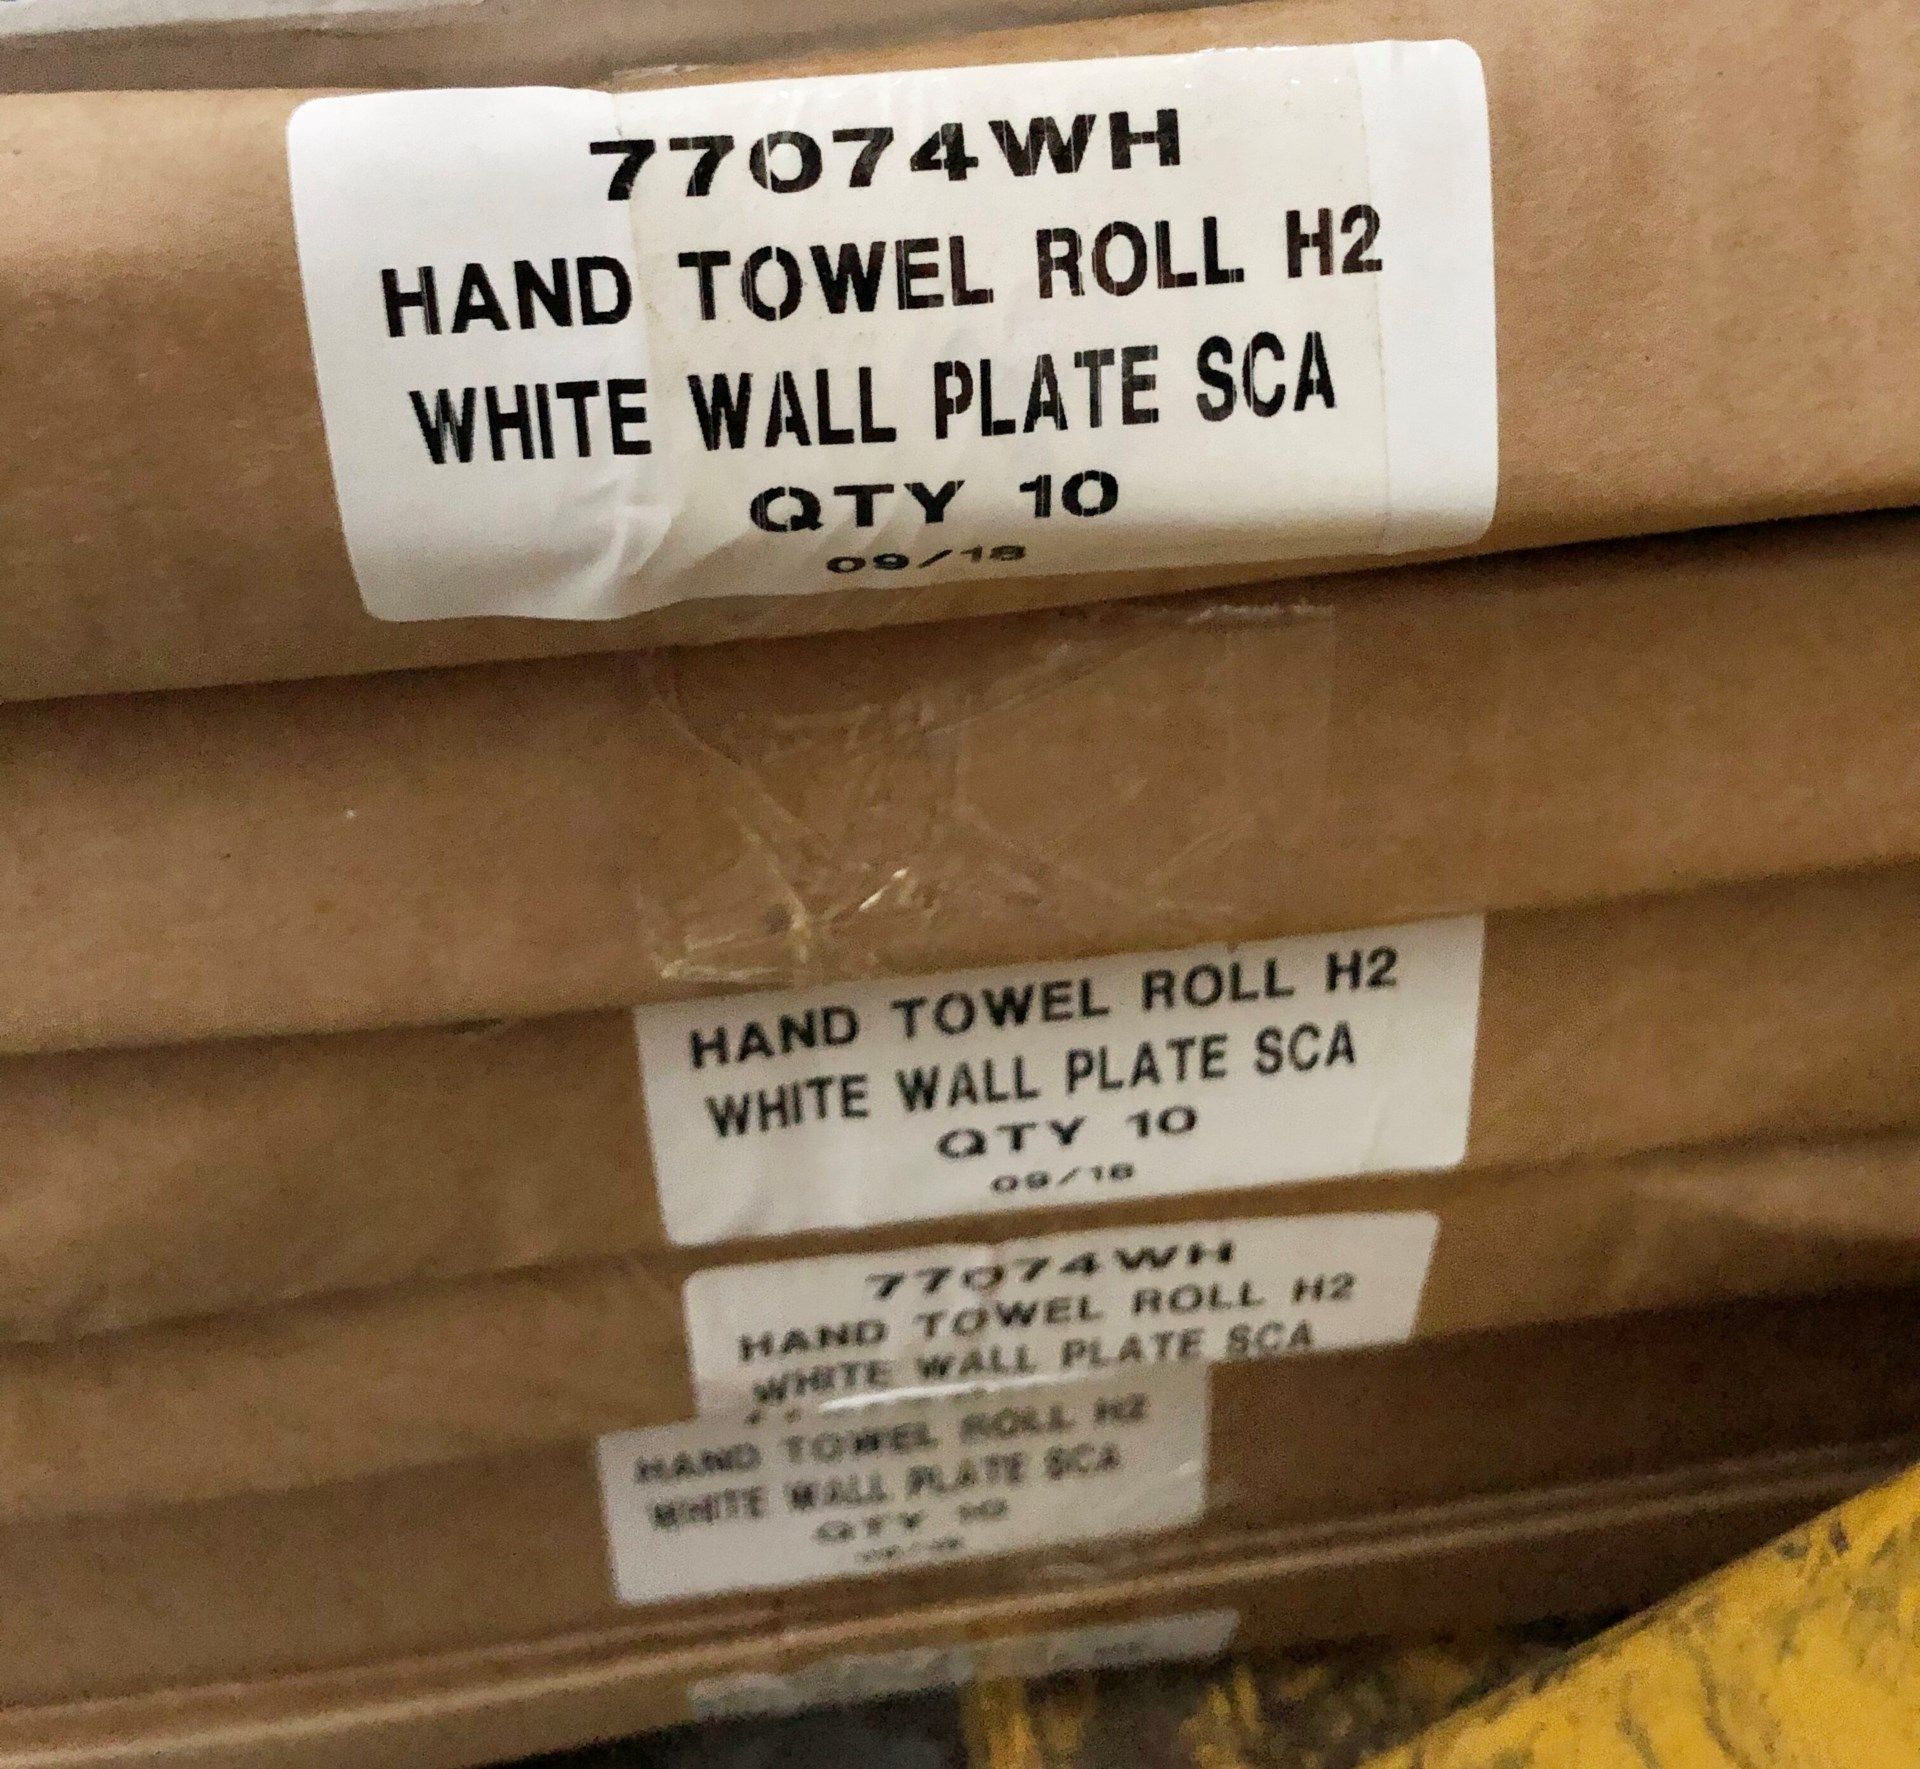 7 x 10 lots of Hand Towel Roll H2 White Wall Plate - Ref: 77074WH - Location: Altrincham WA14